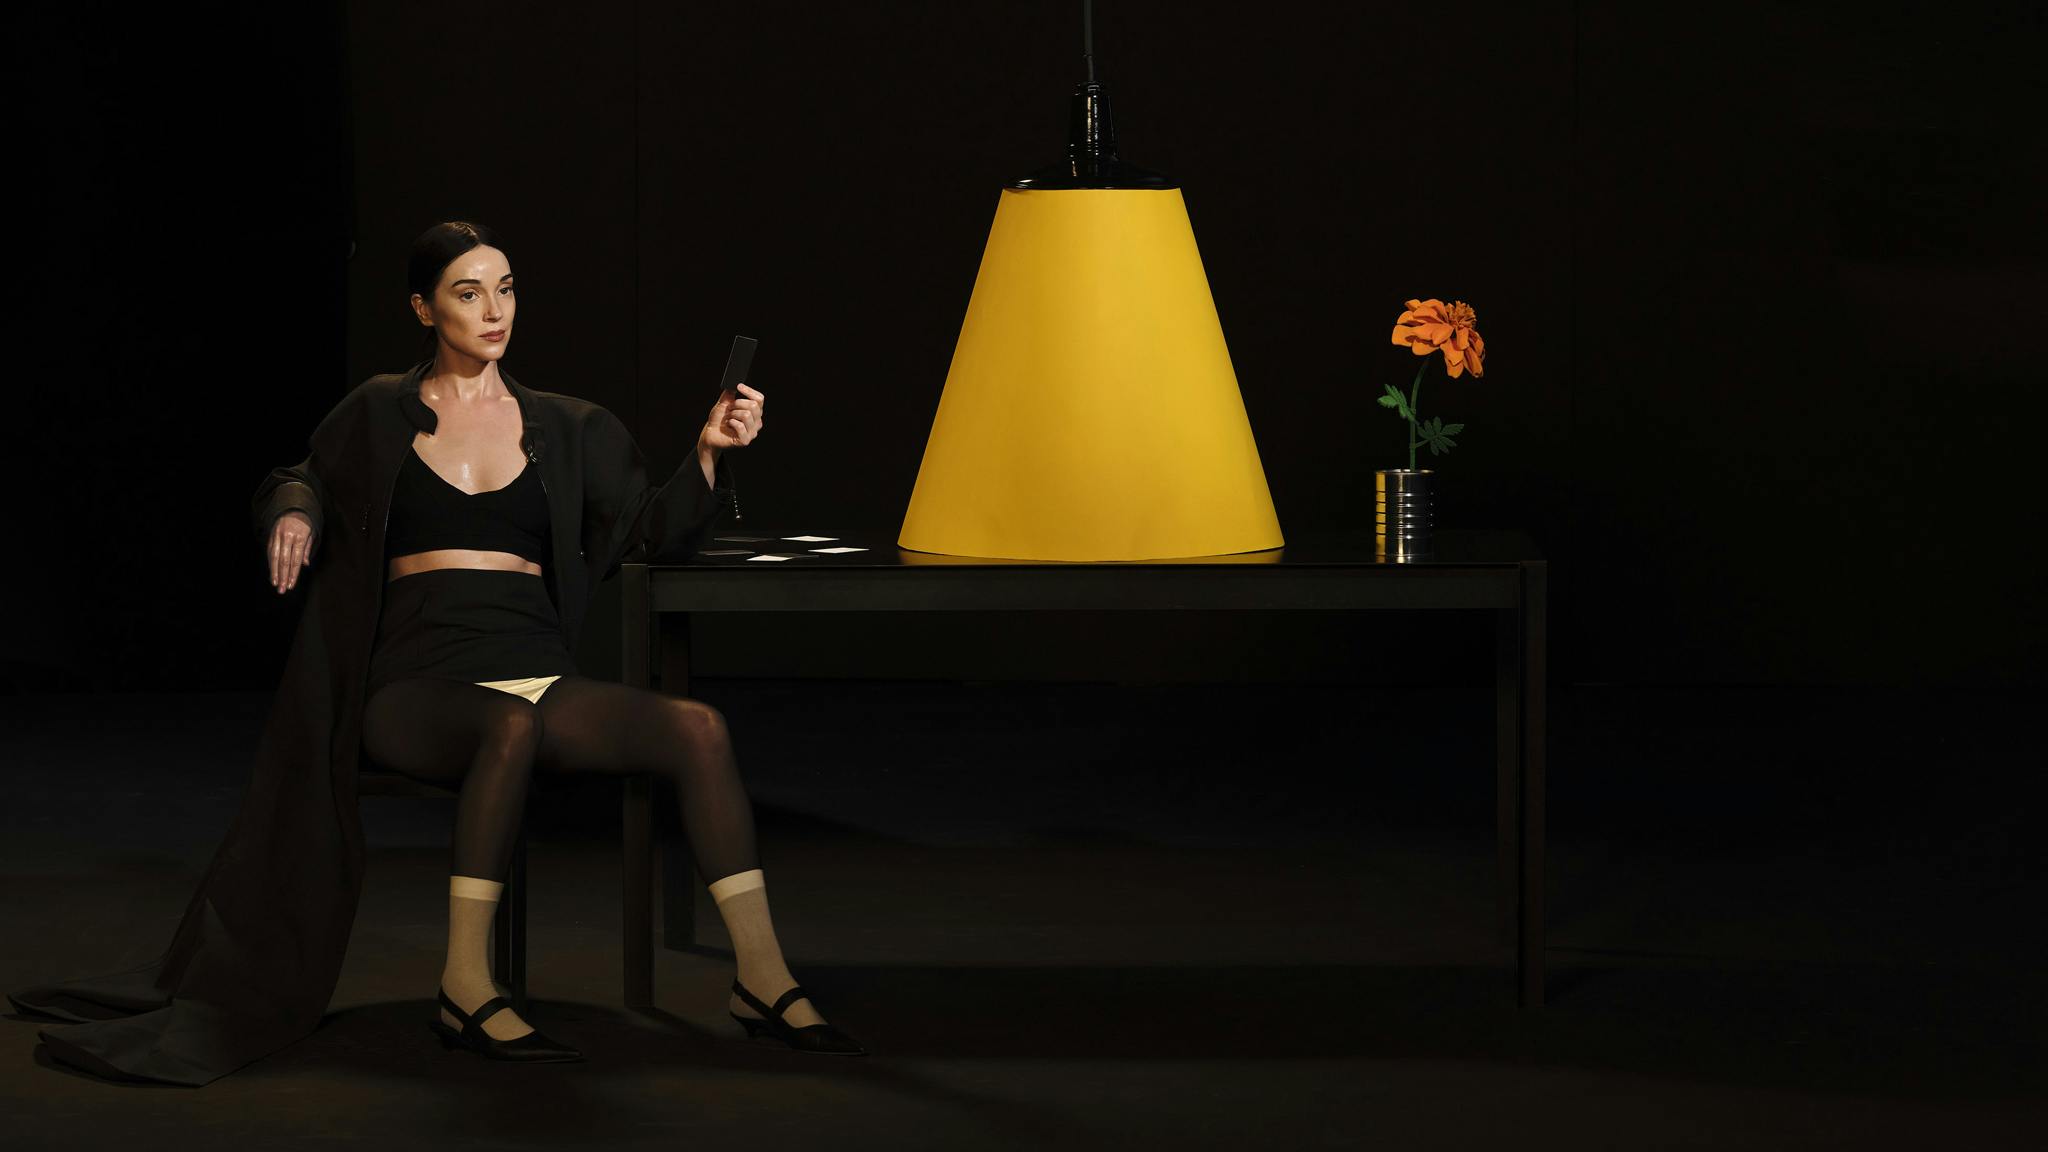 St Vincent announces new album featuring Dave Grohl, Josh Freese and more